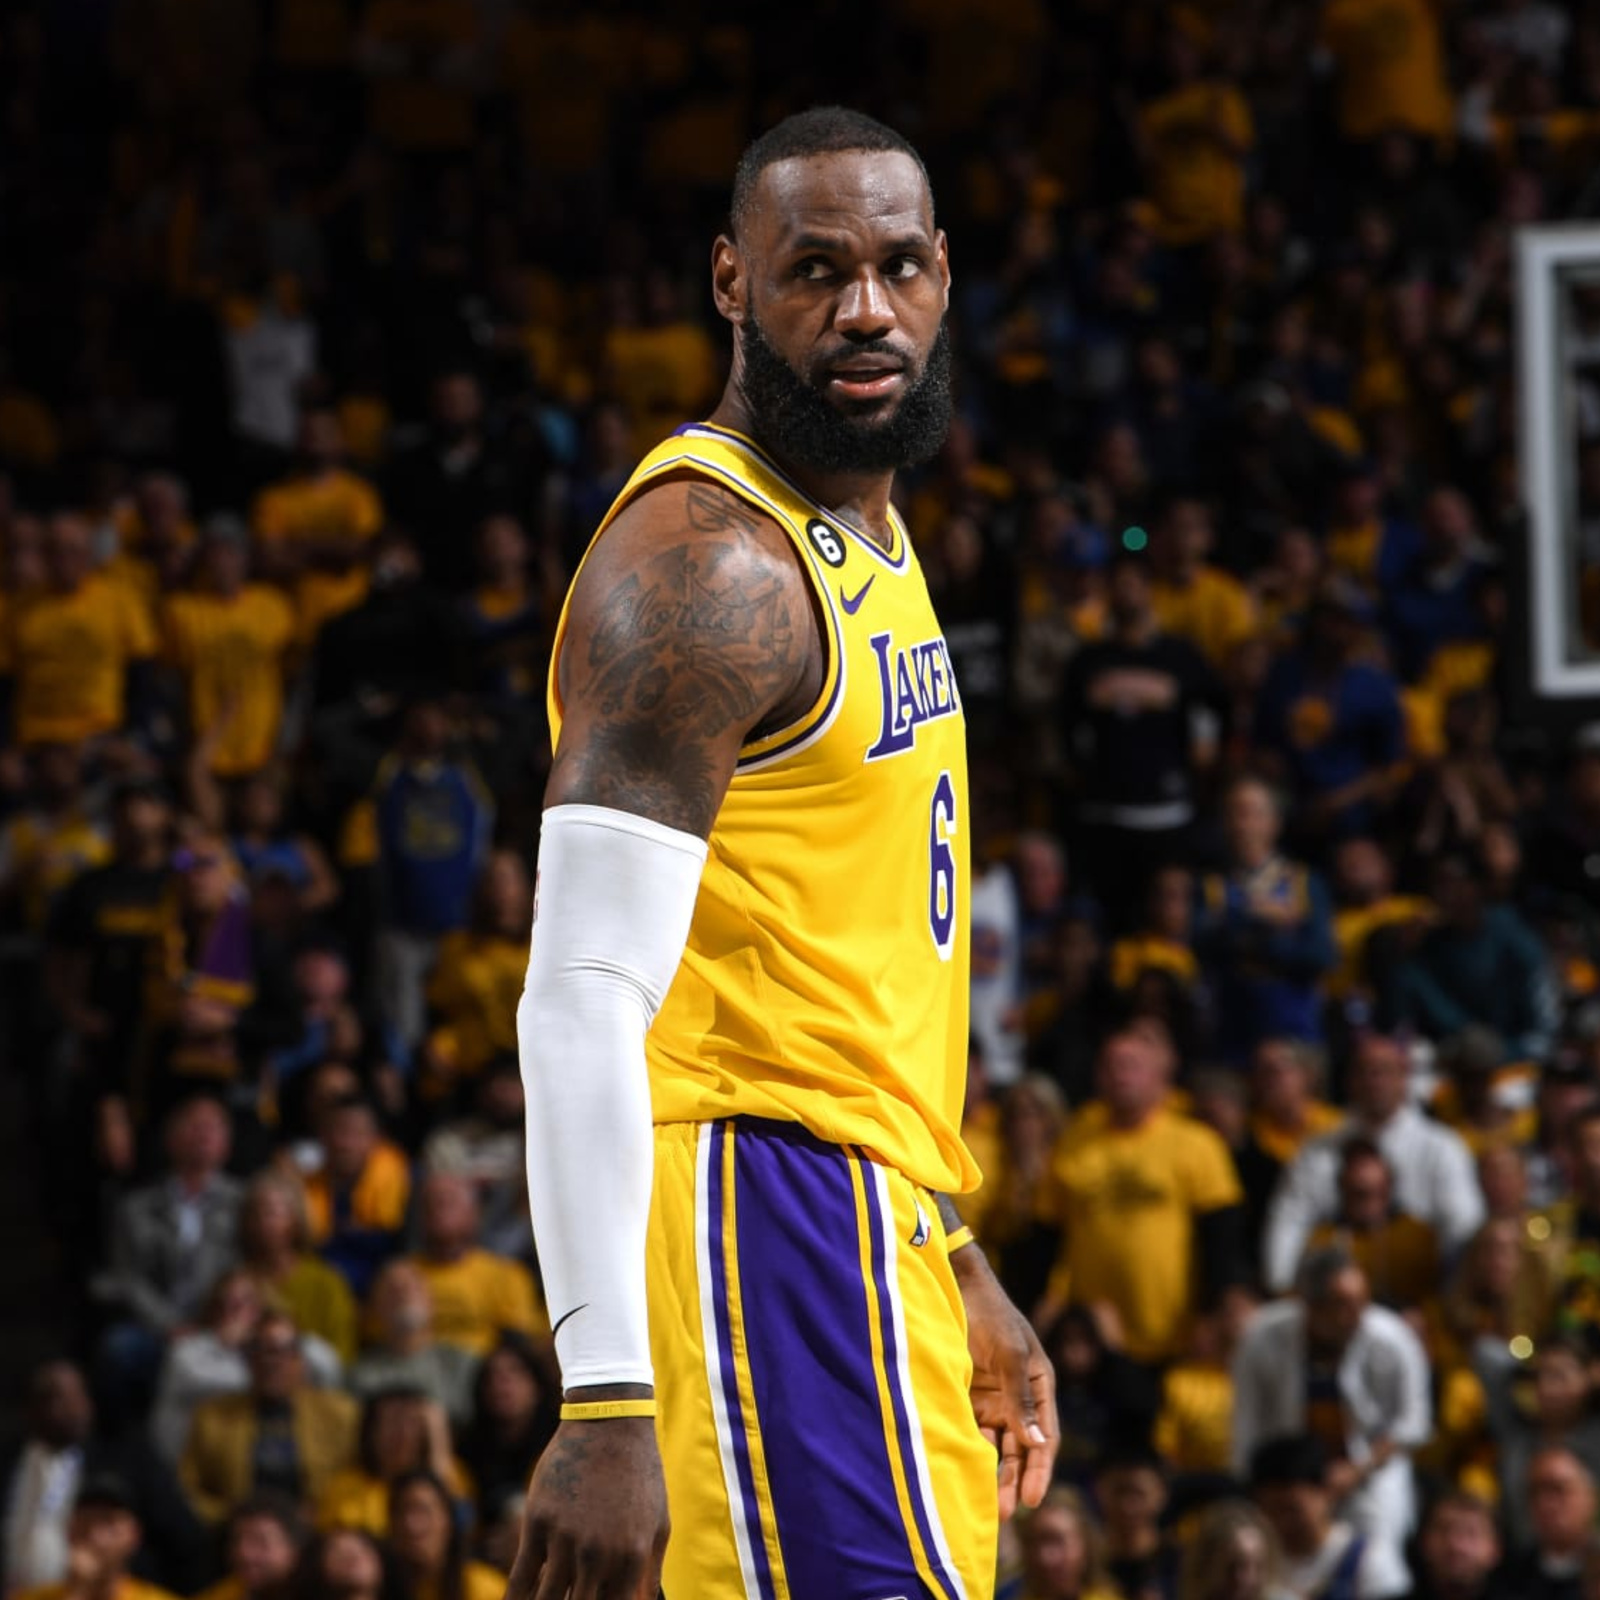 NBA - LeBron James' back issues are more apparent - ESPN